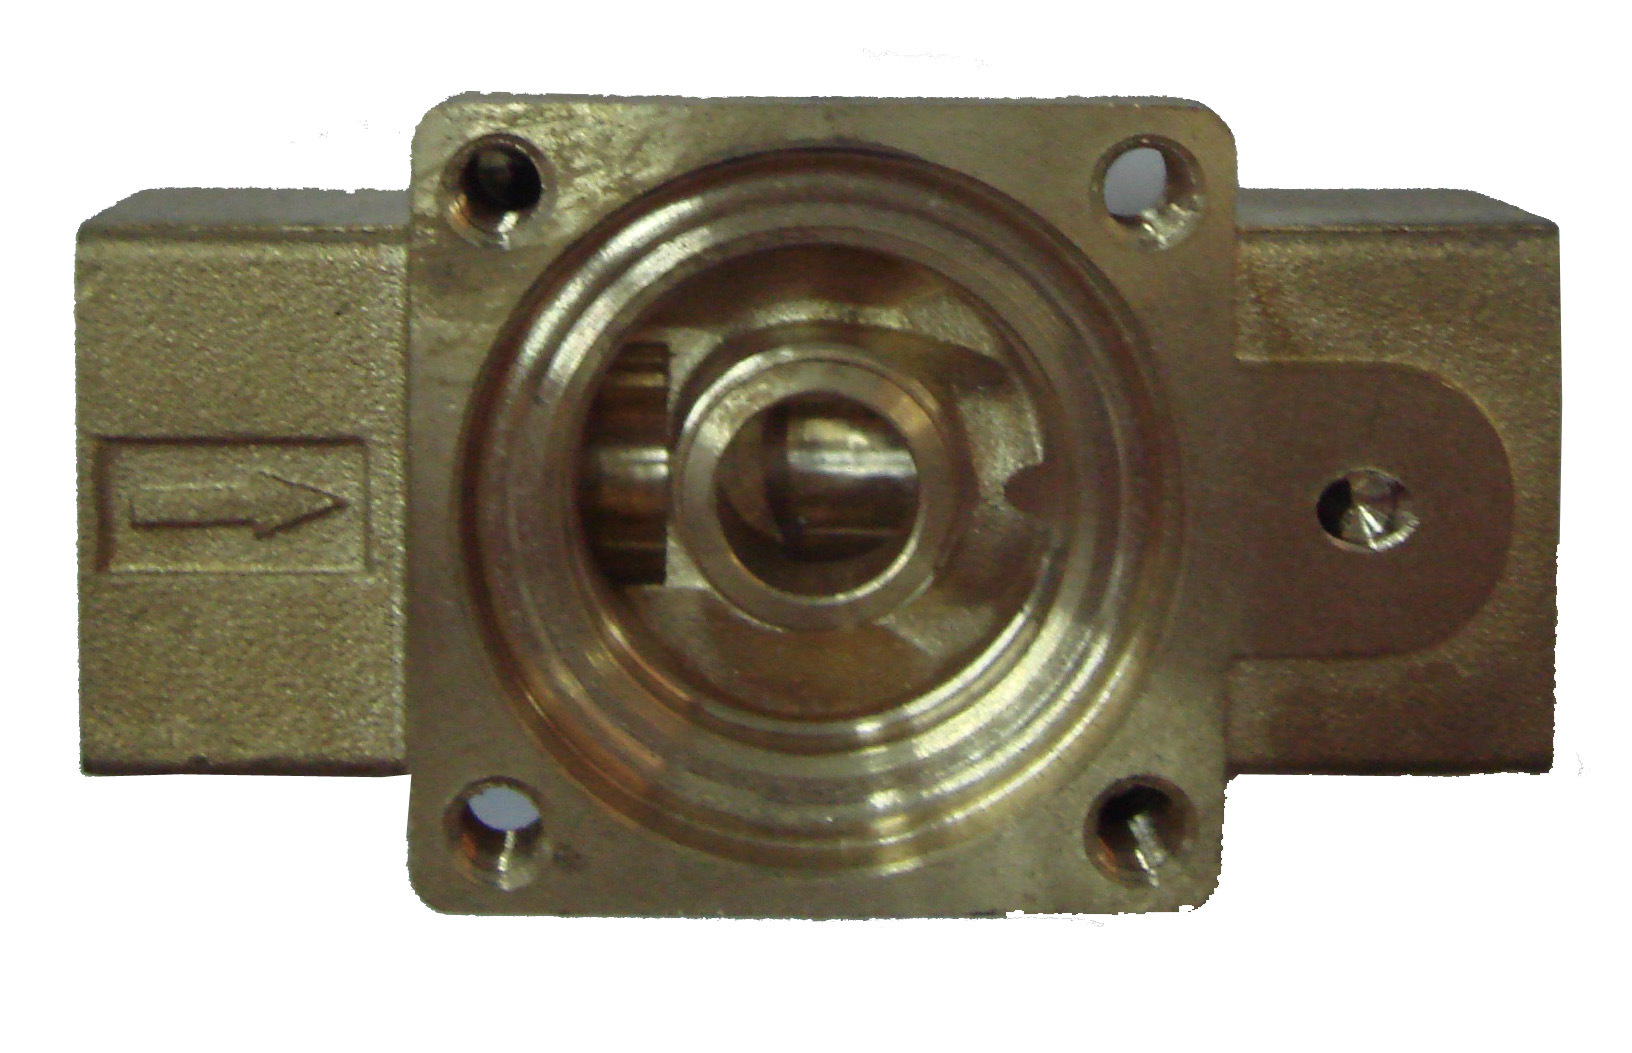 Forged Brass Valve Body with CNC Machining